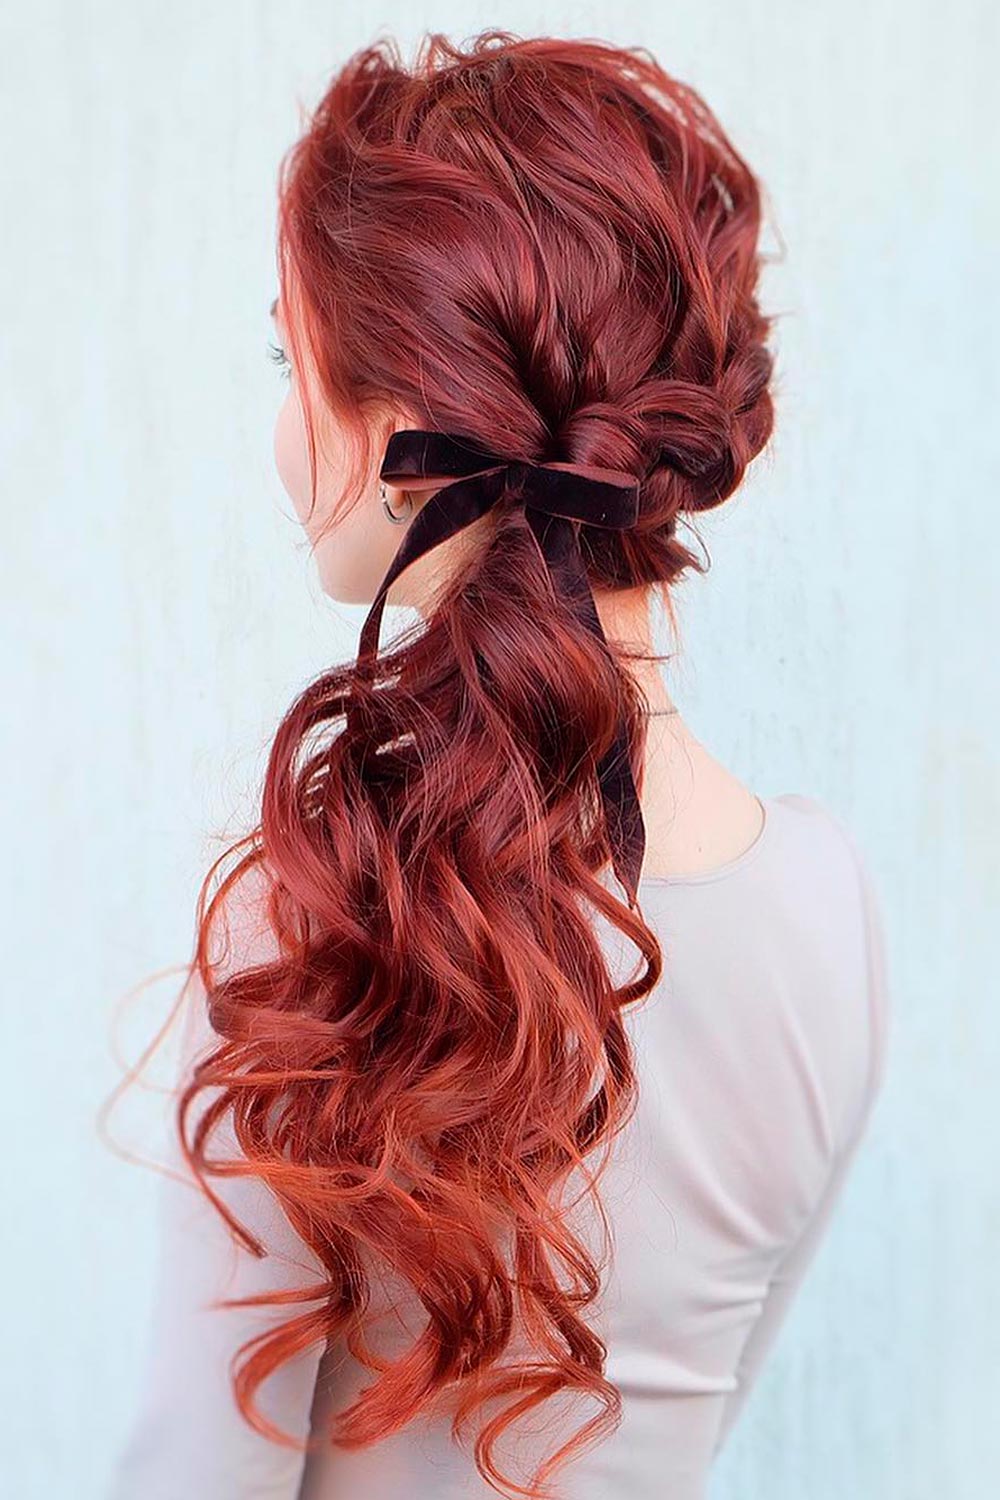 Just adorn your pony with a festive ribbon and one of the best Christmas party hairstyles is guaranteed to you